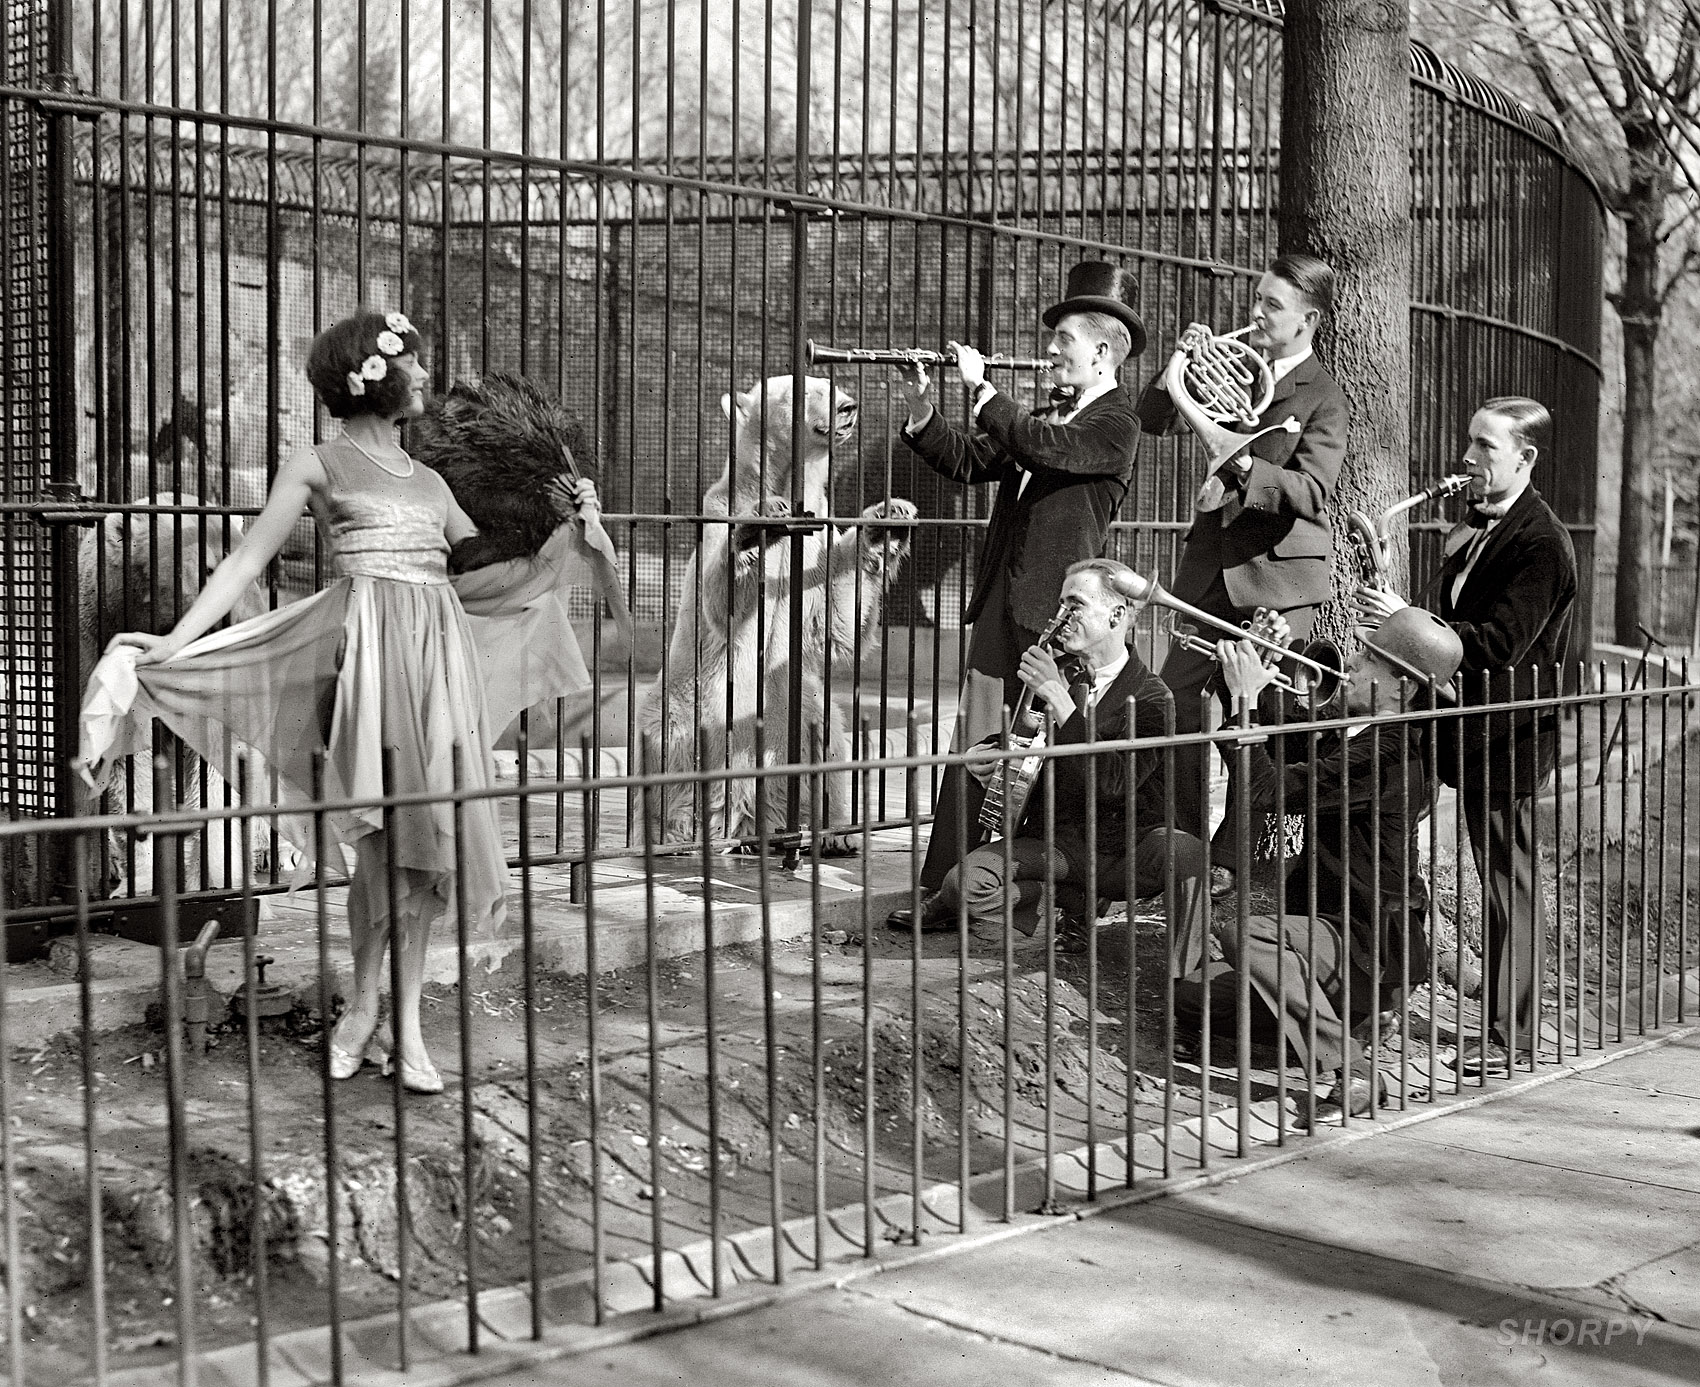 Washington, D.C., 1925. "Better 'Ole Club Orchestra at the National Zoo." National Photo Company Collection glass negative, Library of Congress. View full size.